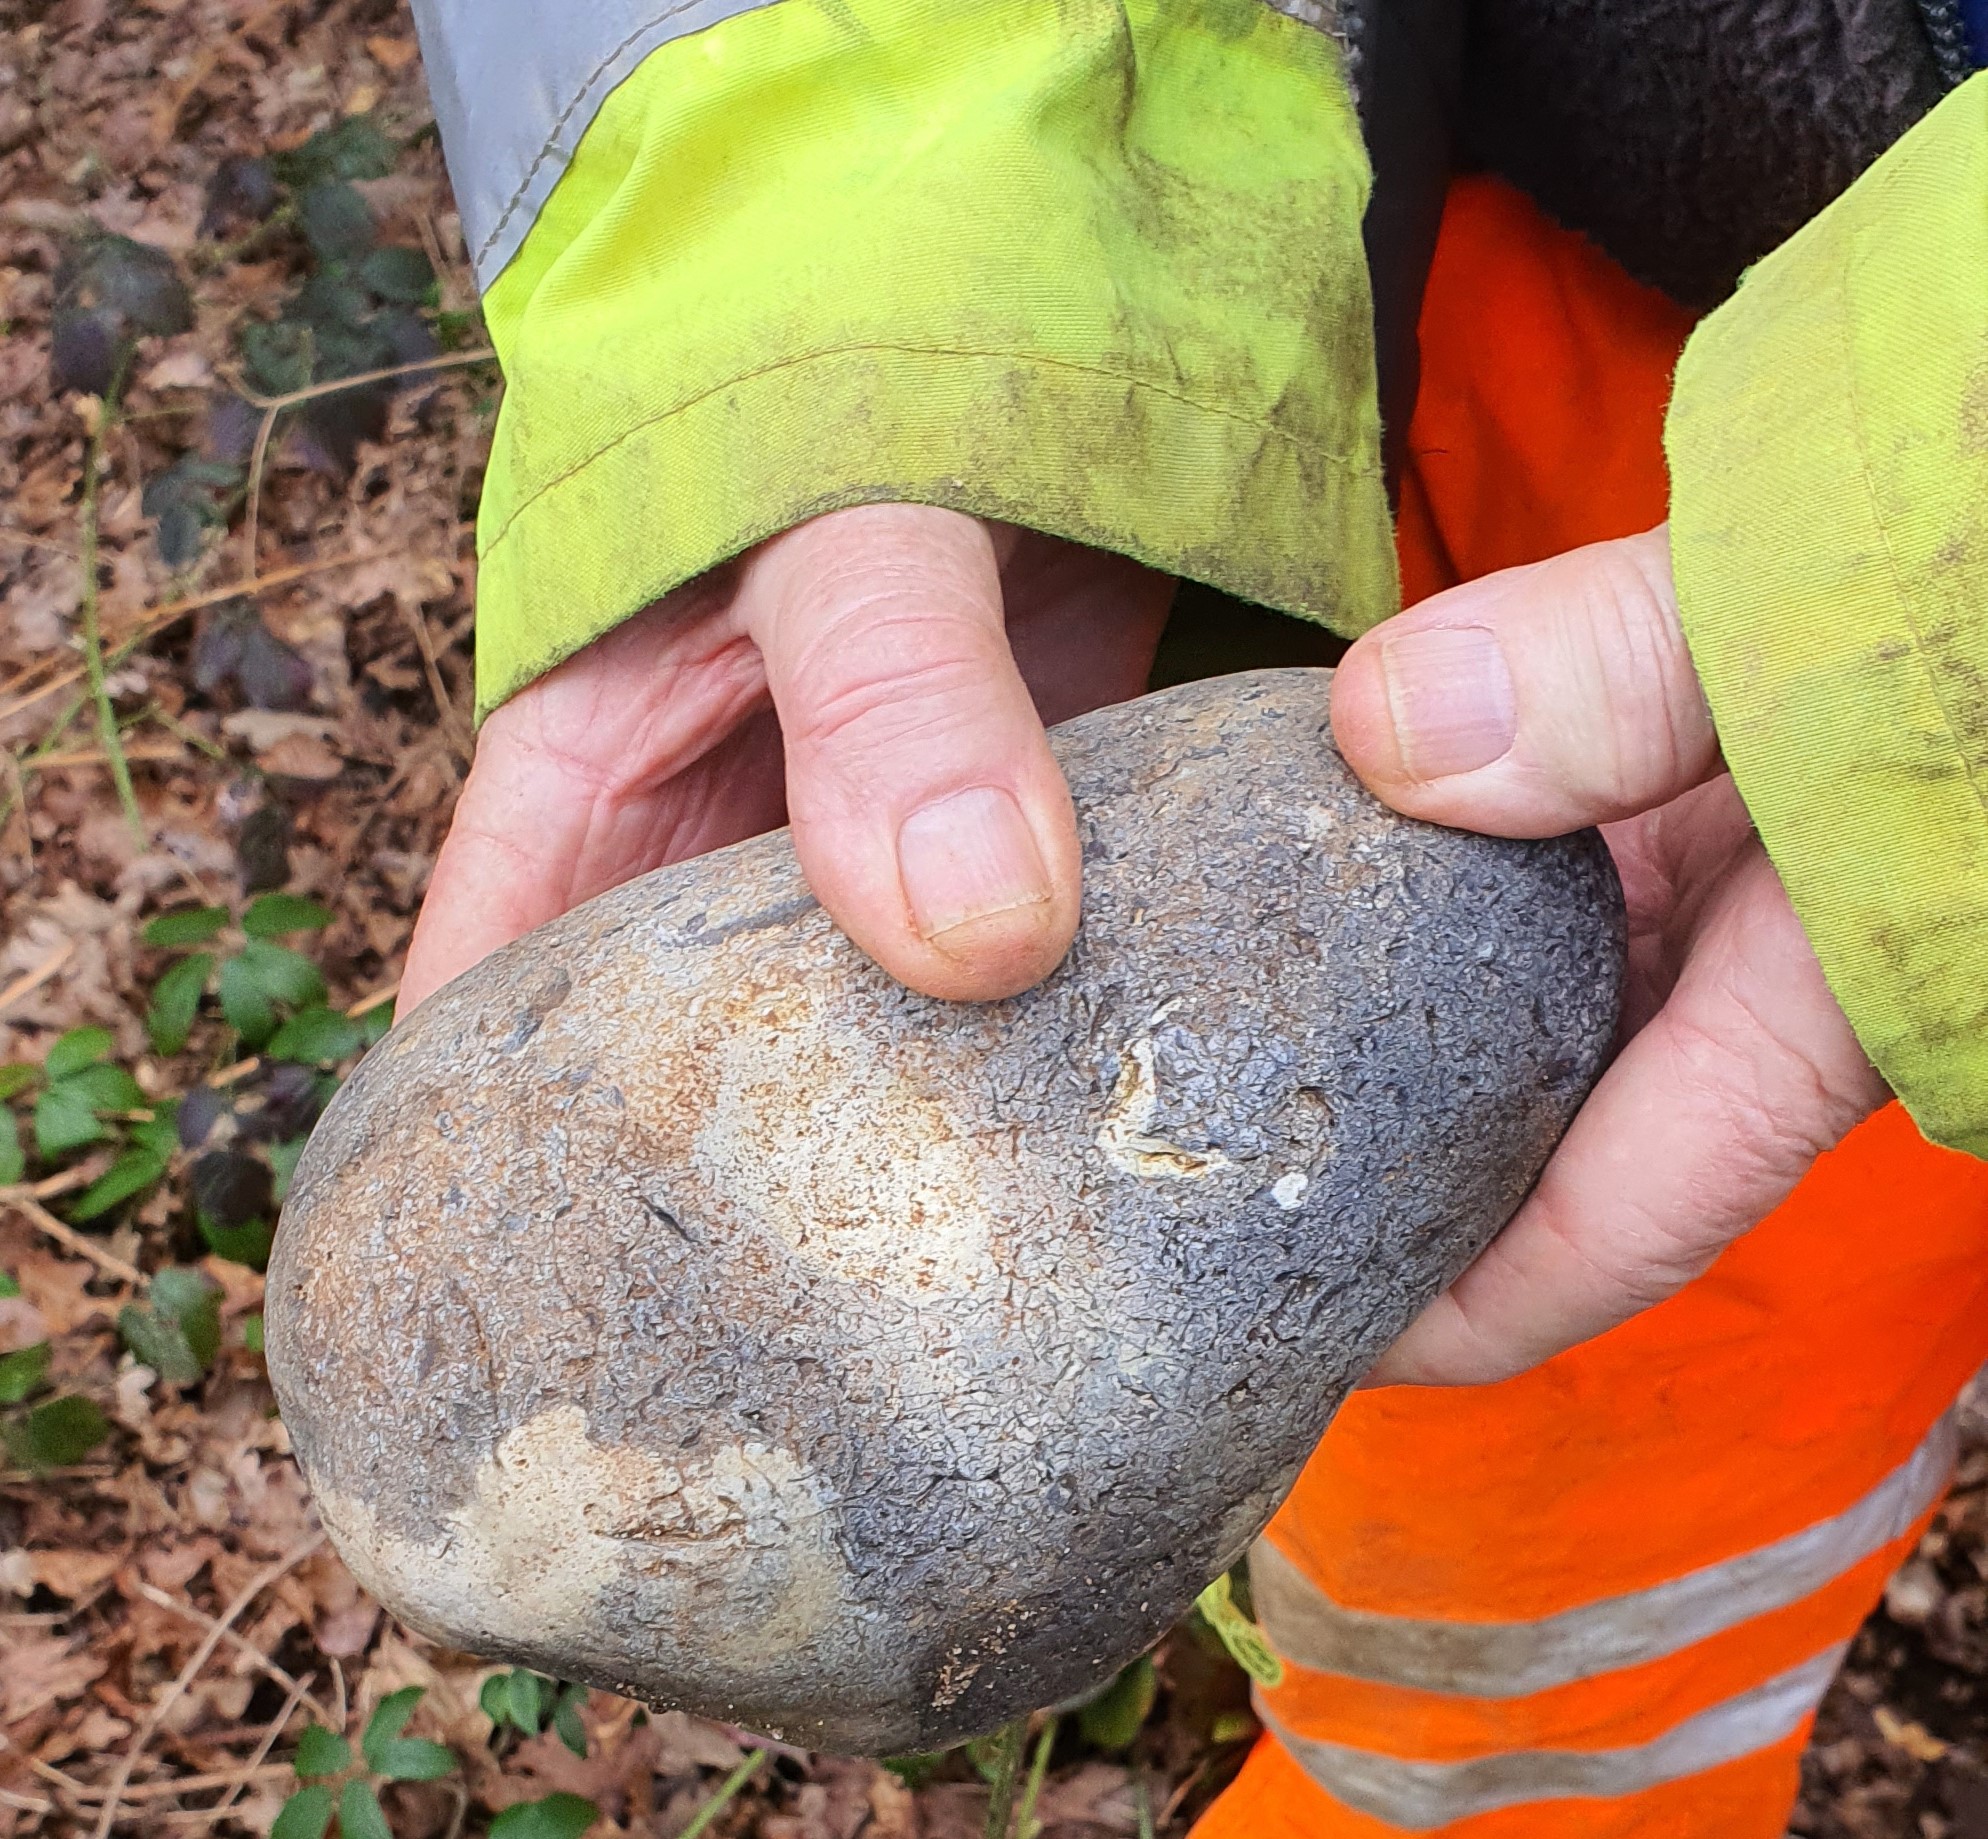 large pebble / cobble from tree root in SSSI